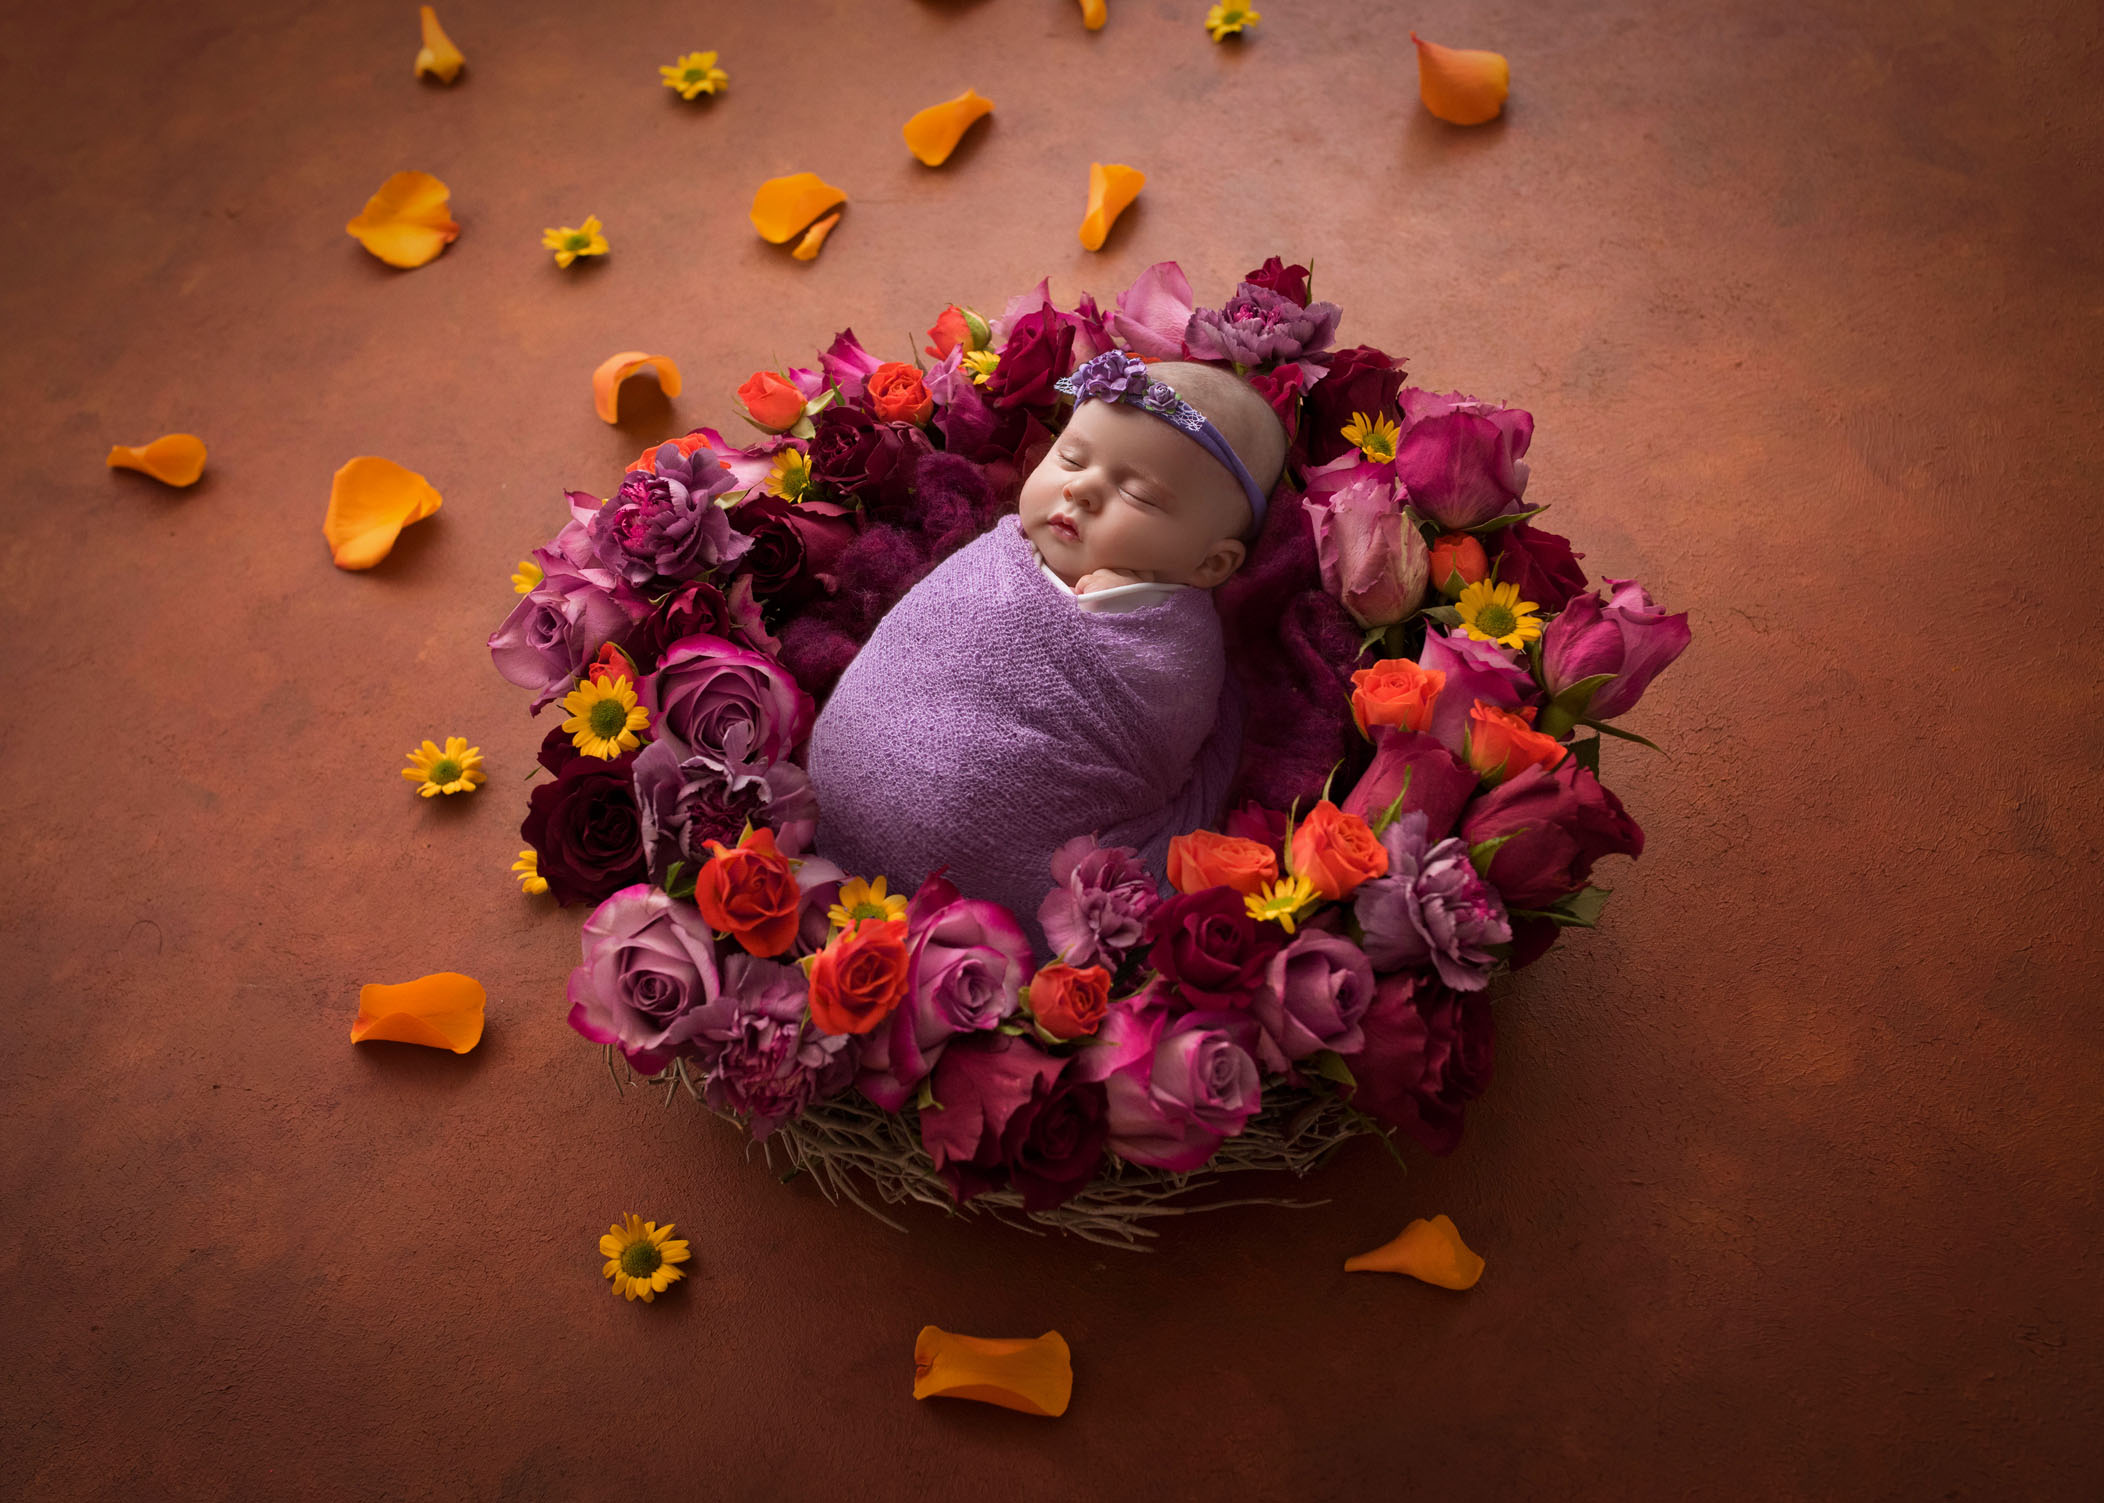 newborn baby girl sleeping in floral nest made of roses